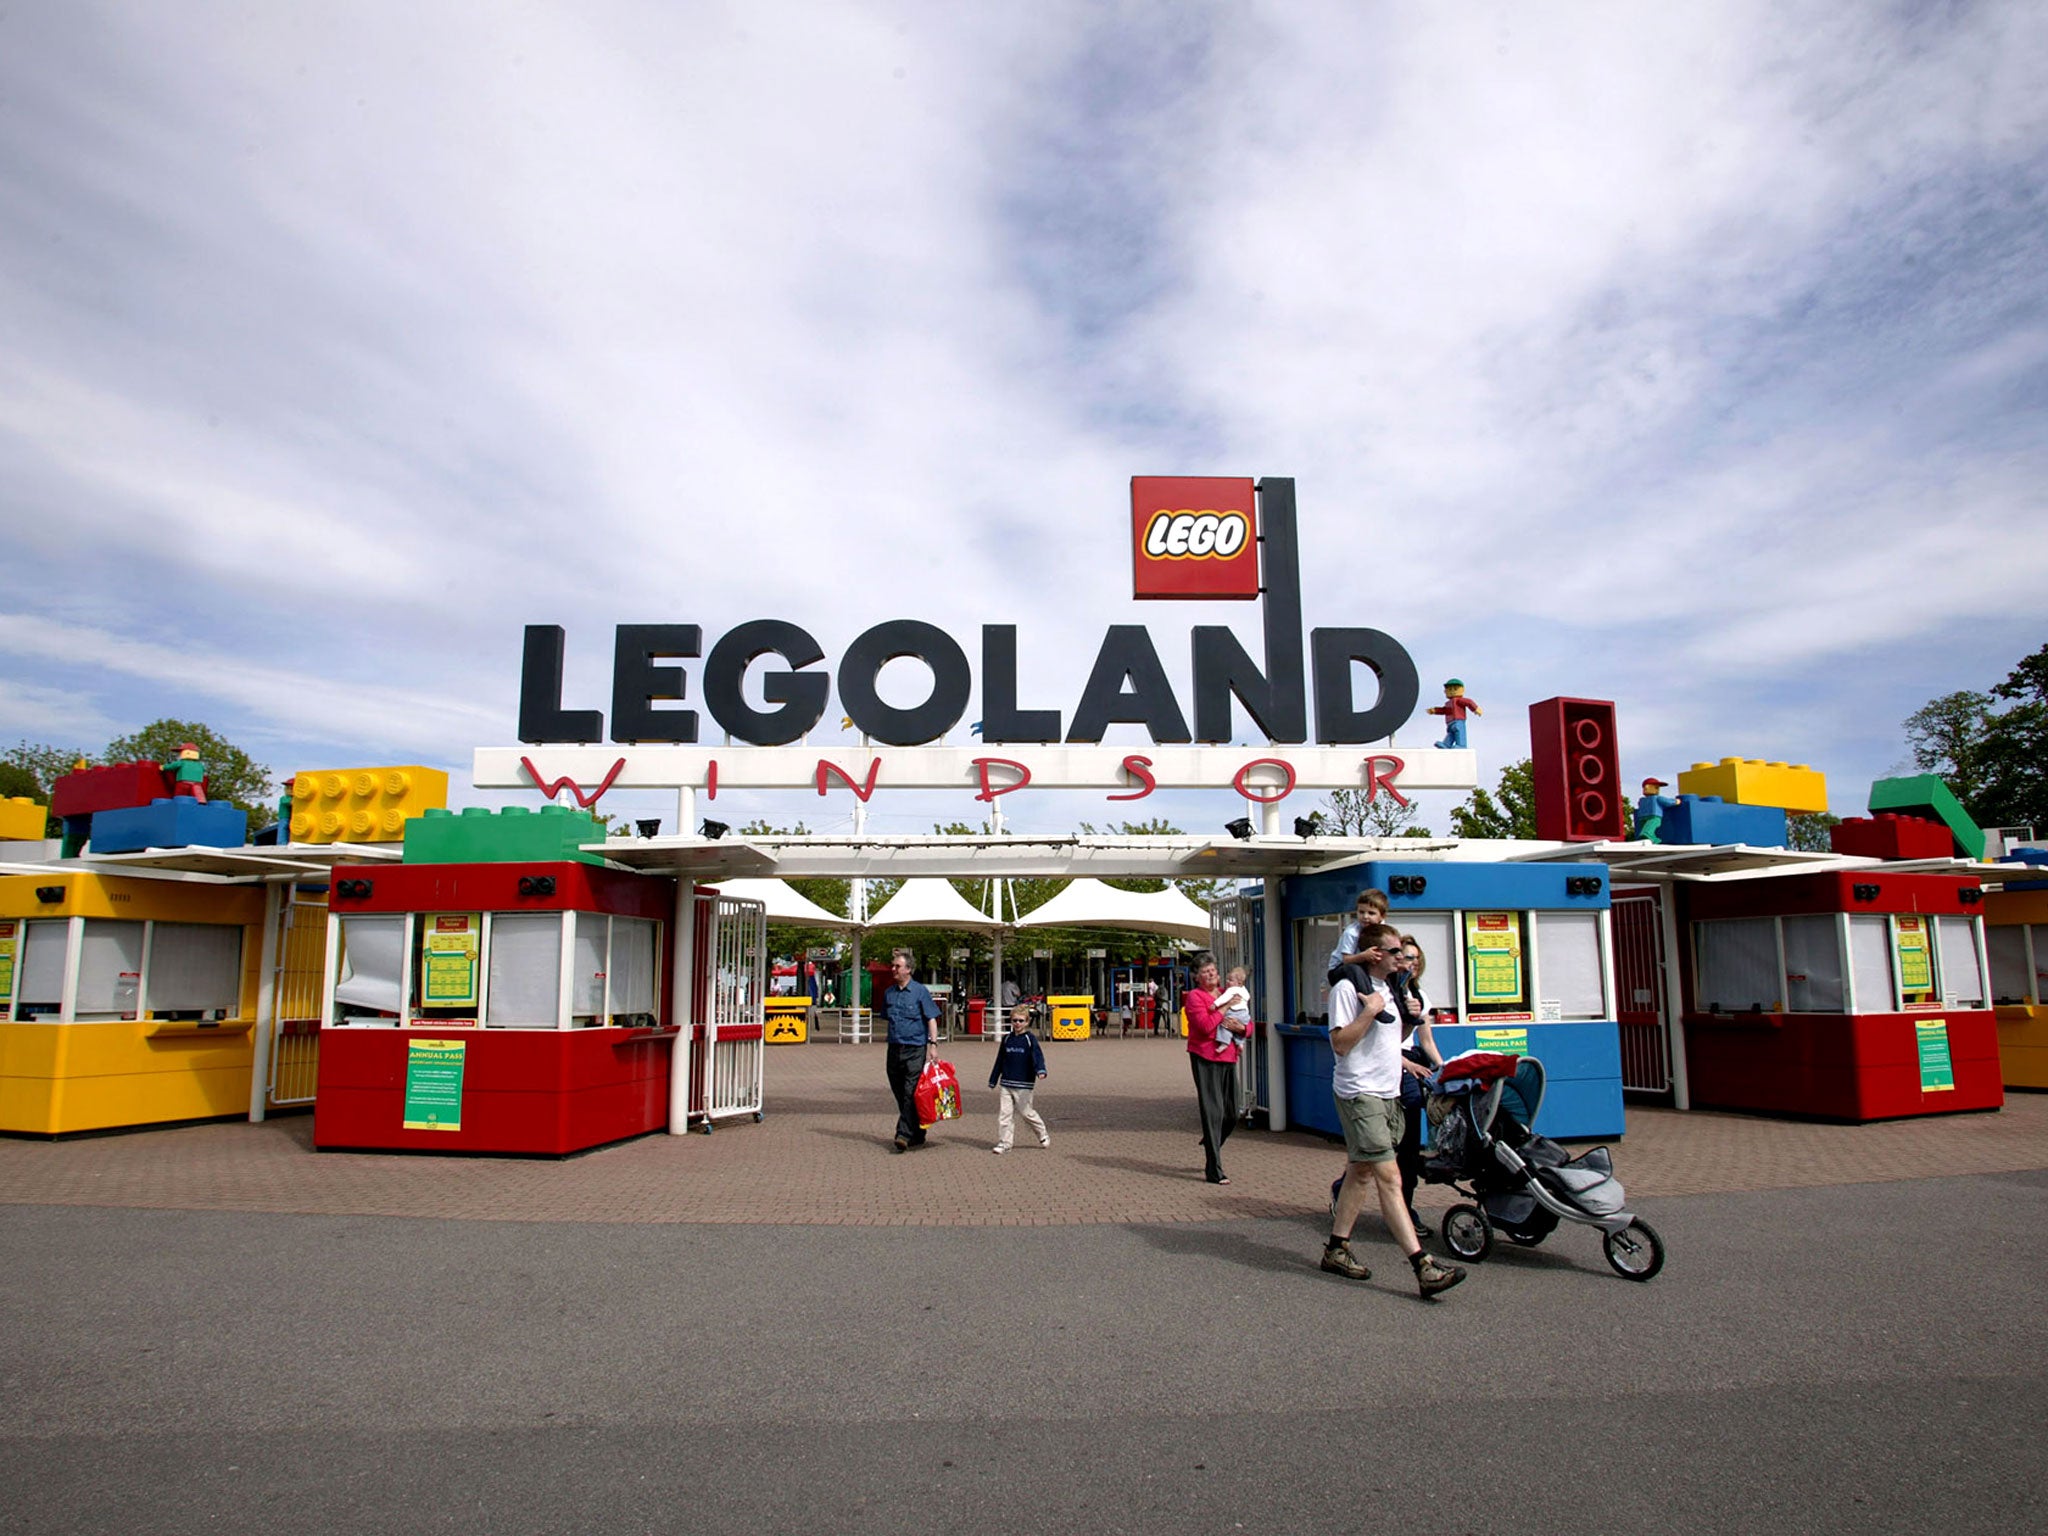 Legoland was forced to shut down its Facebook page after a number of offensive posts